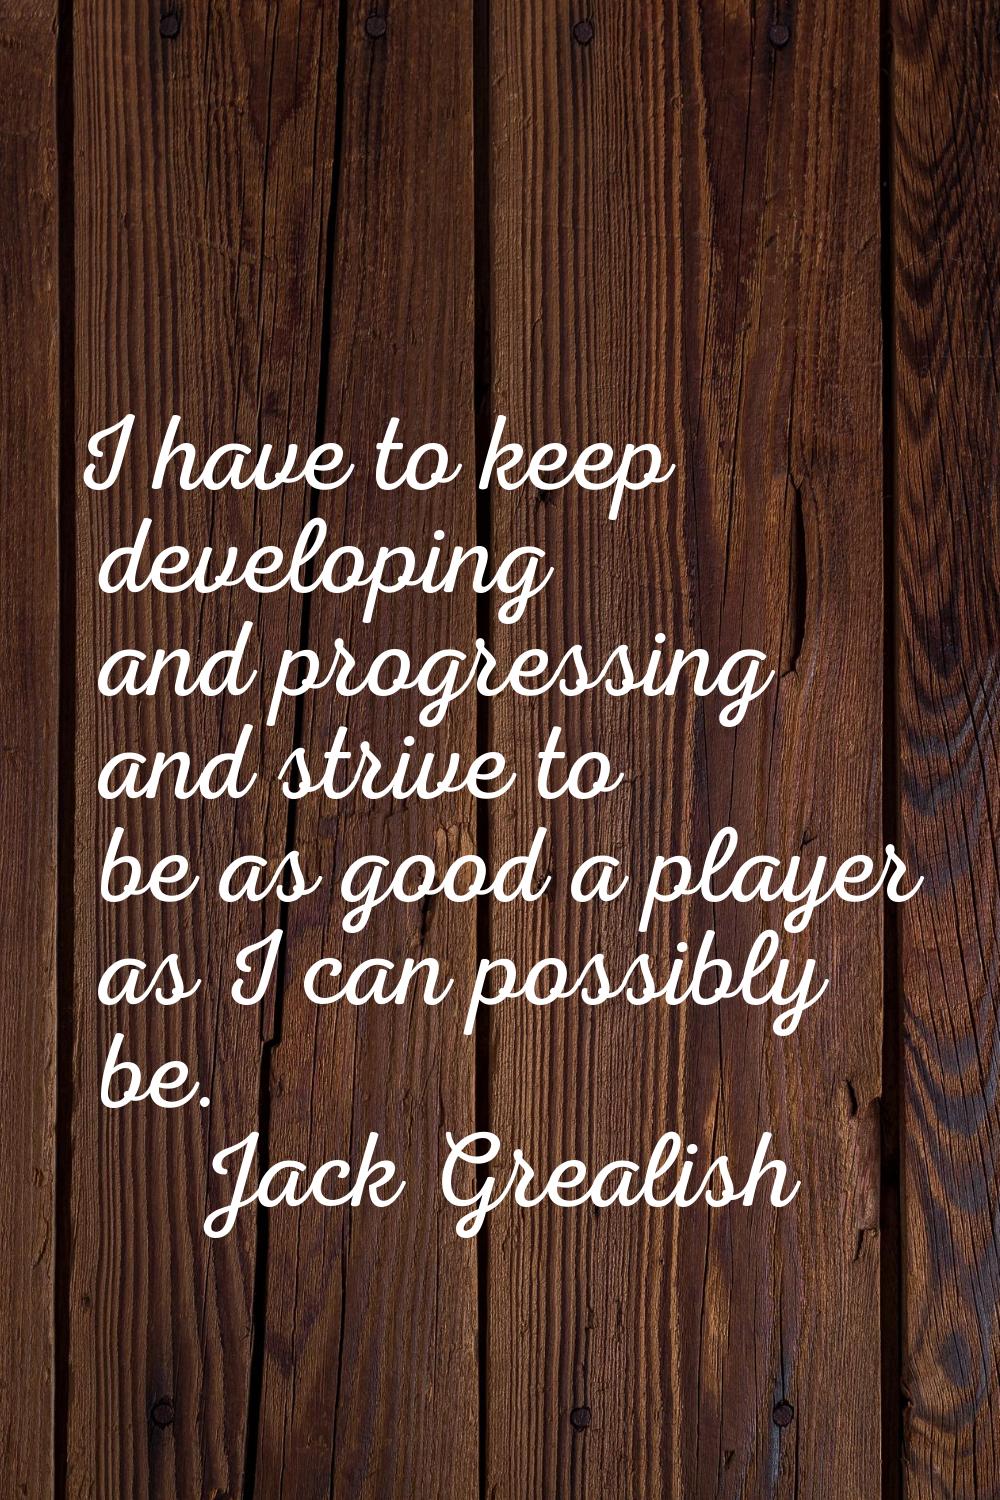 I have to keep developing and progressing and strive to be as good a player as I can possibly be.